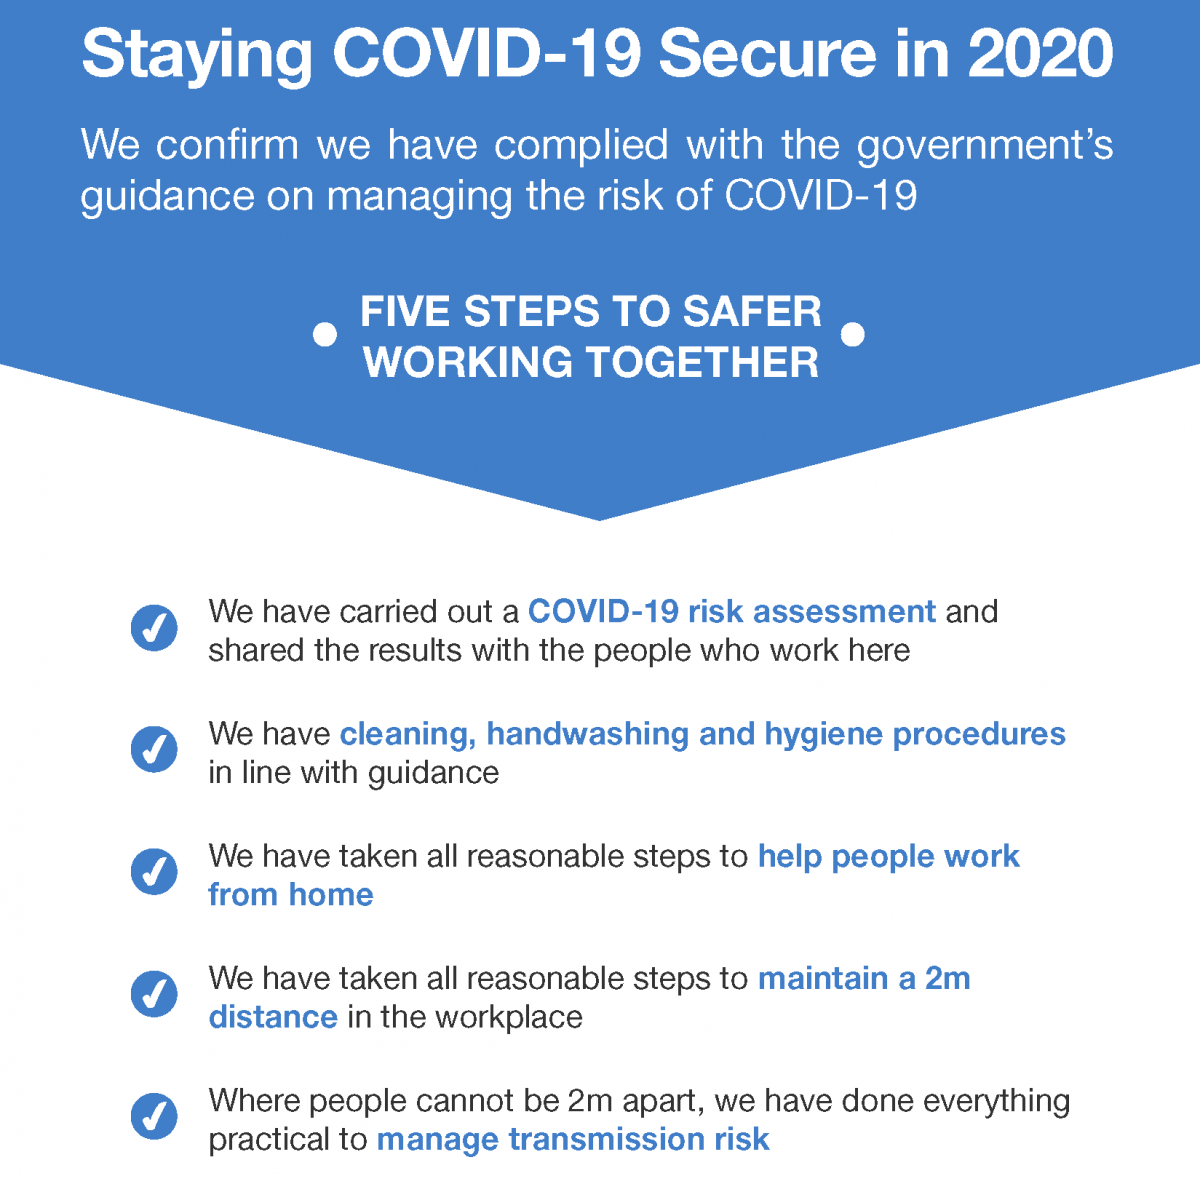 Staying COVID-19 Secure in 2020.
We confirm we have complied with the government’s guidance on managing the risk of COVID-19.
FIVE STEPS TO SAFER WORKING TOGETHER.
We have carried out a COVID-19 risk assessment and shared the results with the people who work here.
We have cleaning, handwashing and hygiene procedures in line with guidance.
We have taken all reasonable steps to help people work from home.
We have taken all reasonable steps to maintain a 2m distance in the workplace.
Where people cannot be 2m apart, we have done everything practical to manage transmission risk.